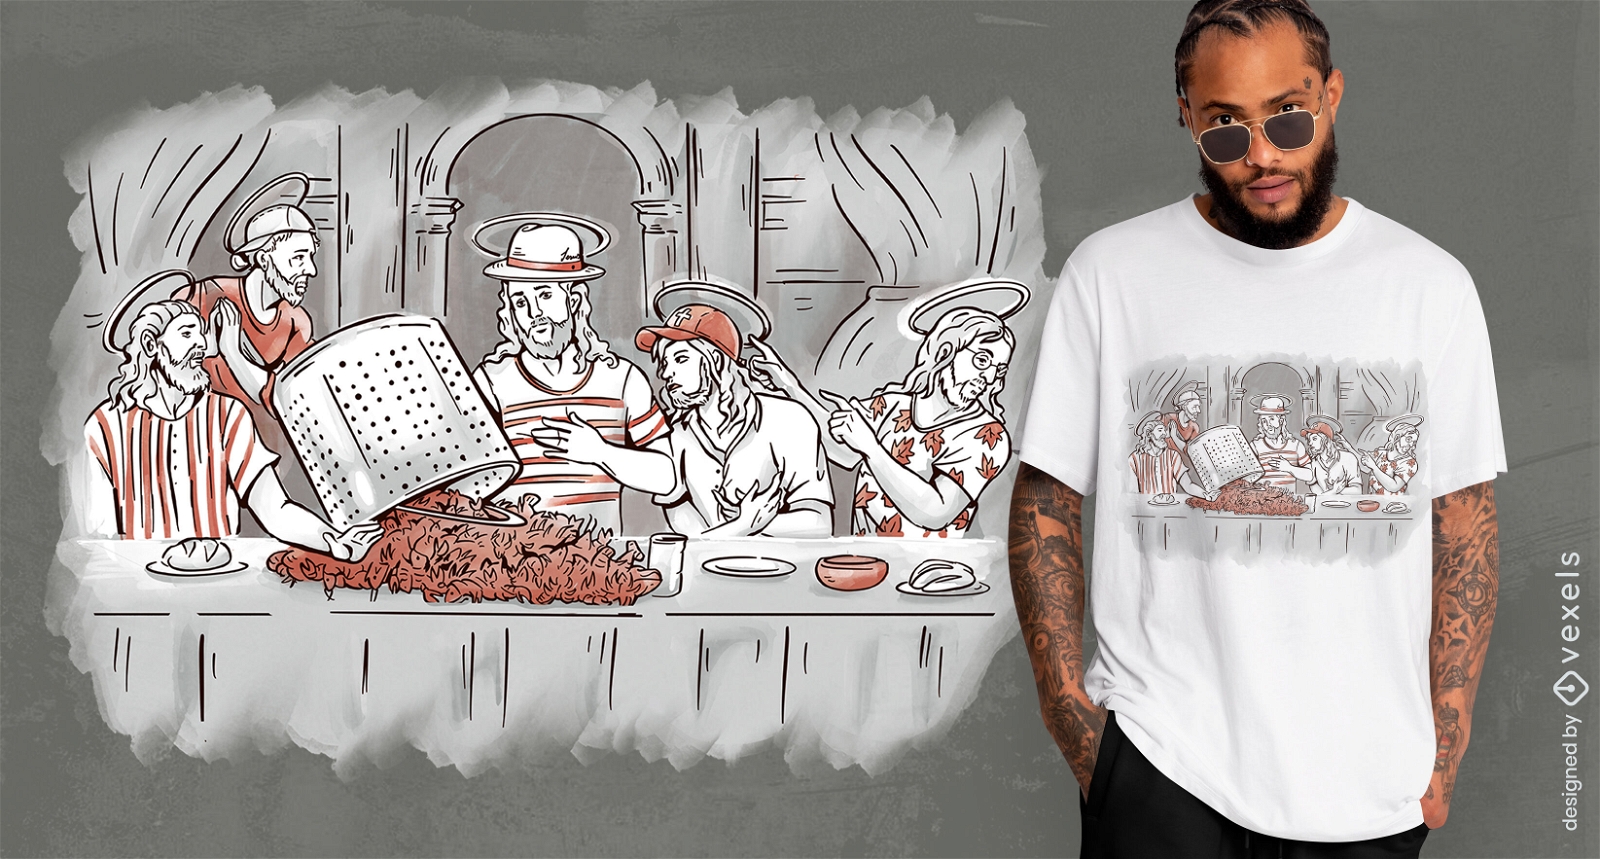 Last supper painting parody t-shirt psd